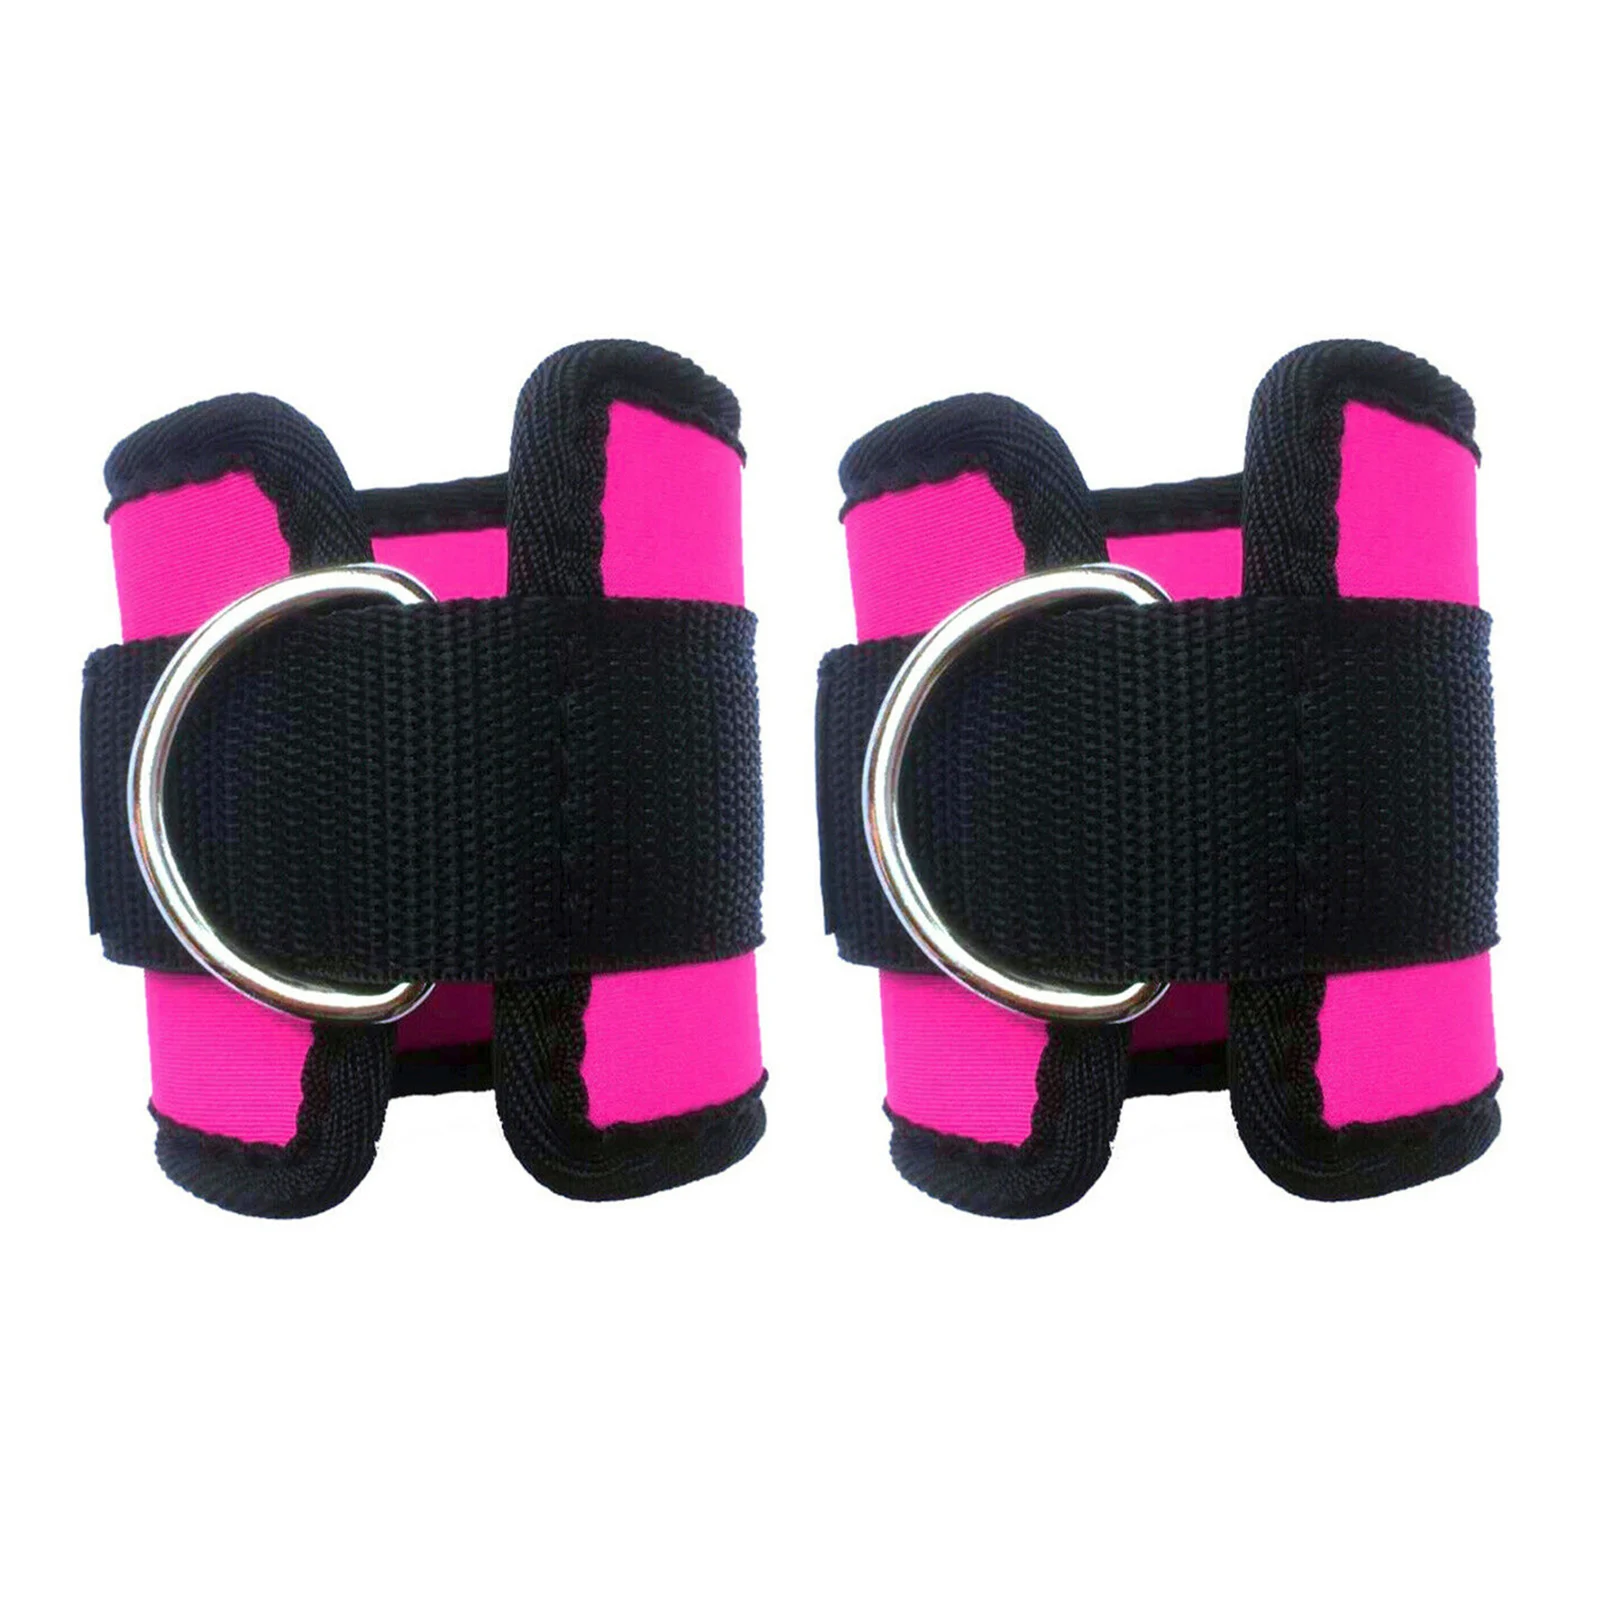 

2pcs Ankle Weights Adjustable Leg Wrist Strap Running Boxing Braclets Straps Gym Accessory XR-Hot